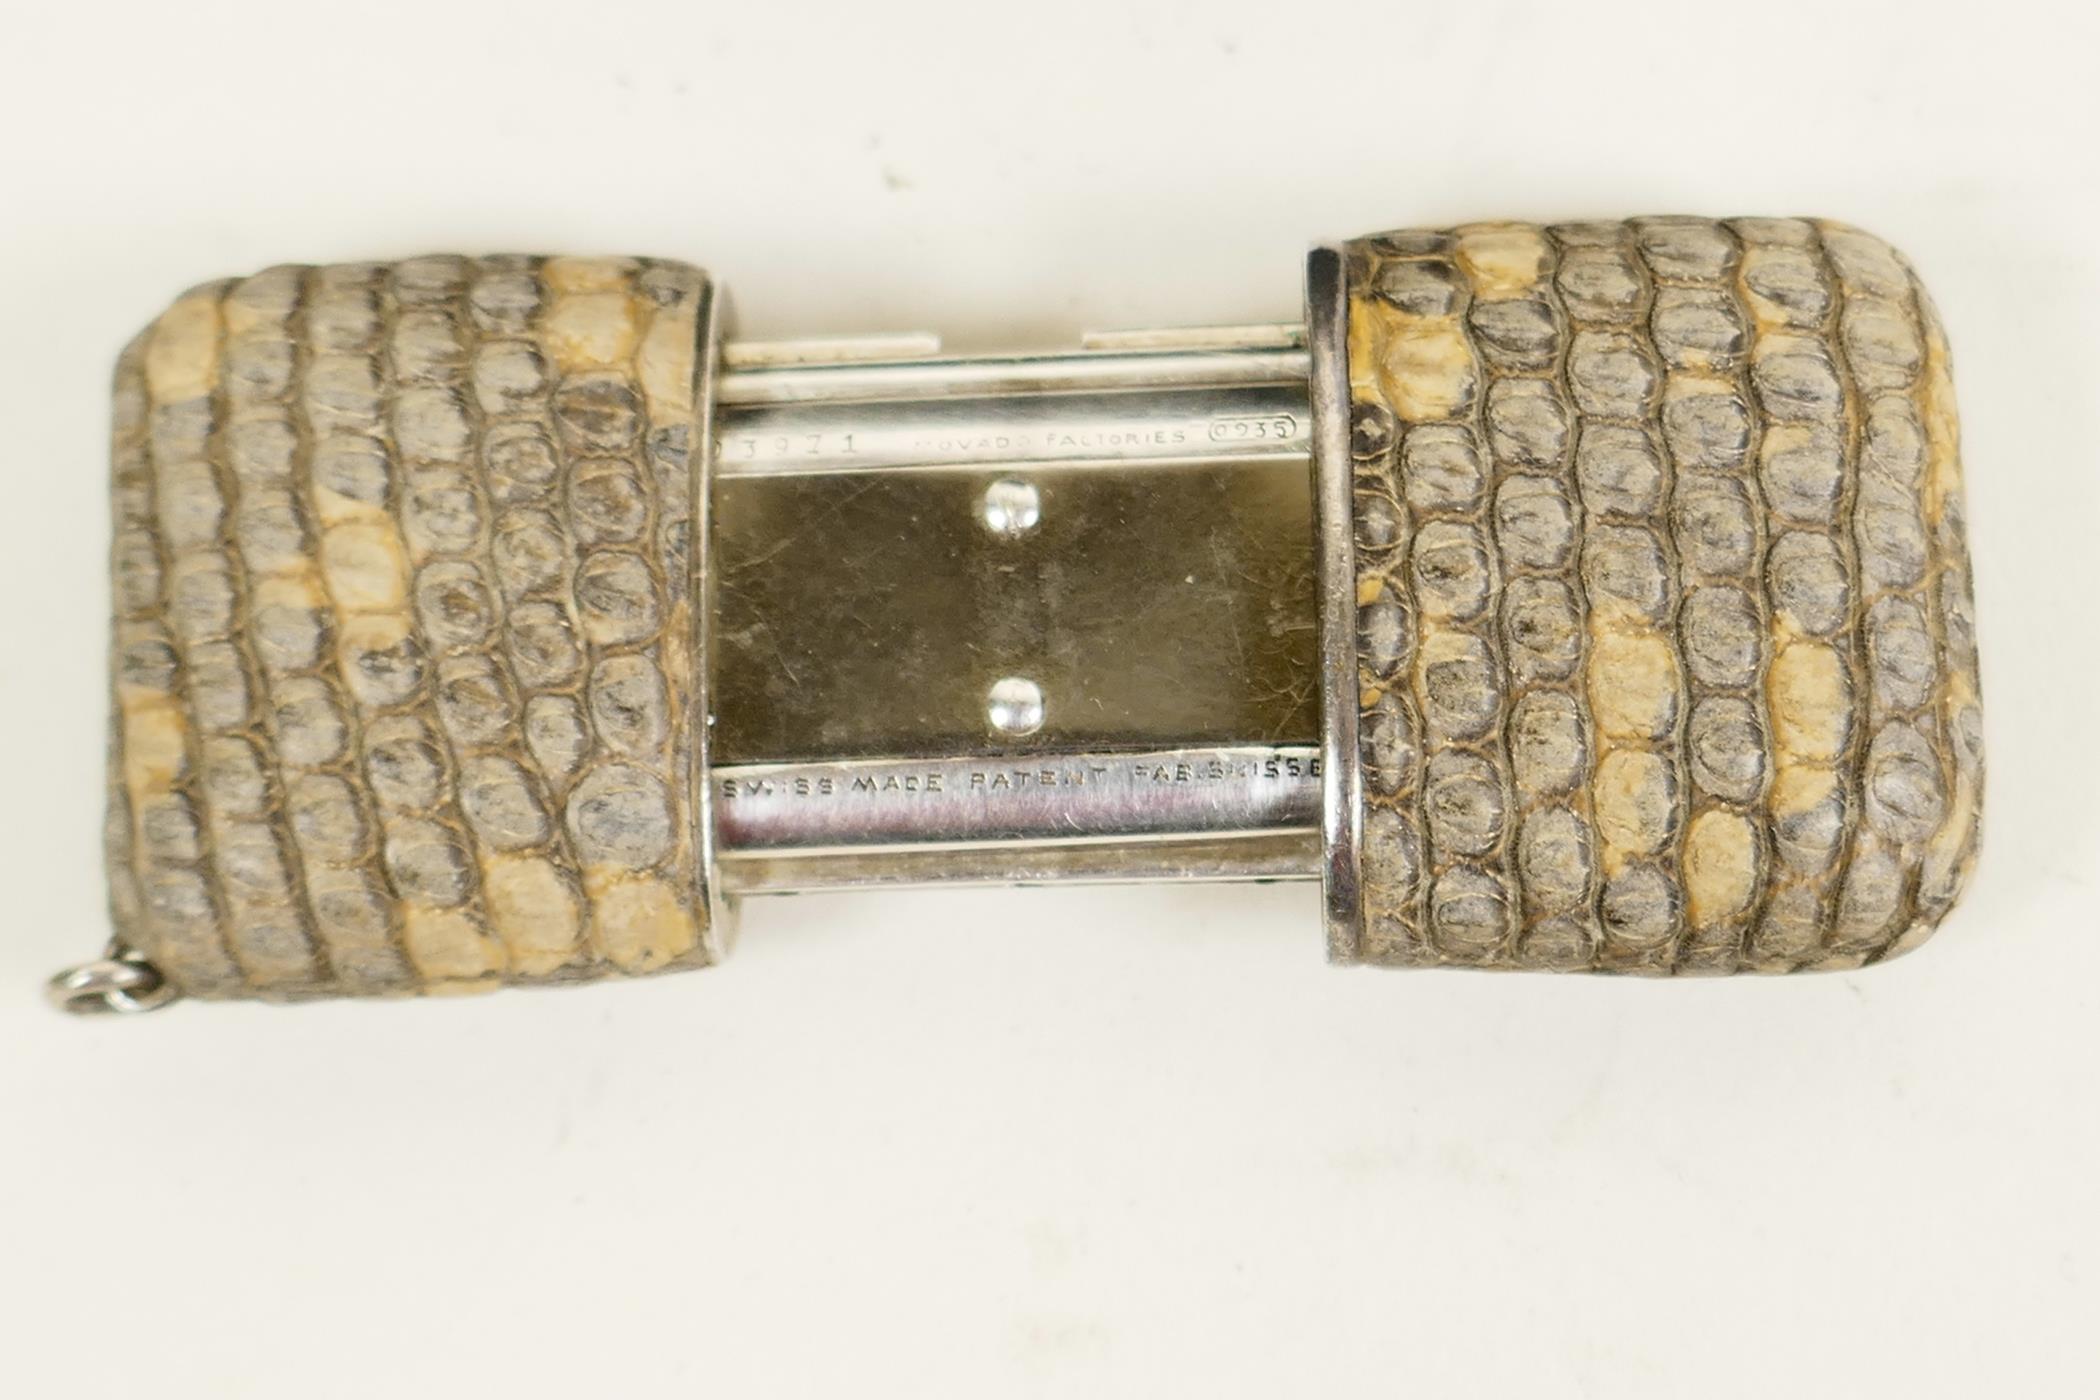 A Movado 'Baby Ermeto' purse watch with snakeskin case in its original presentation box, 1¾" long - Image 4 of 5